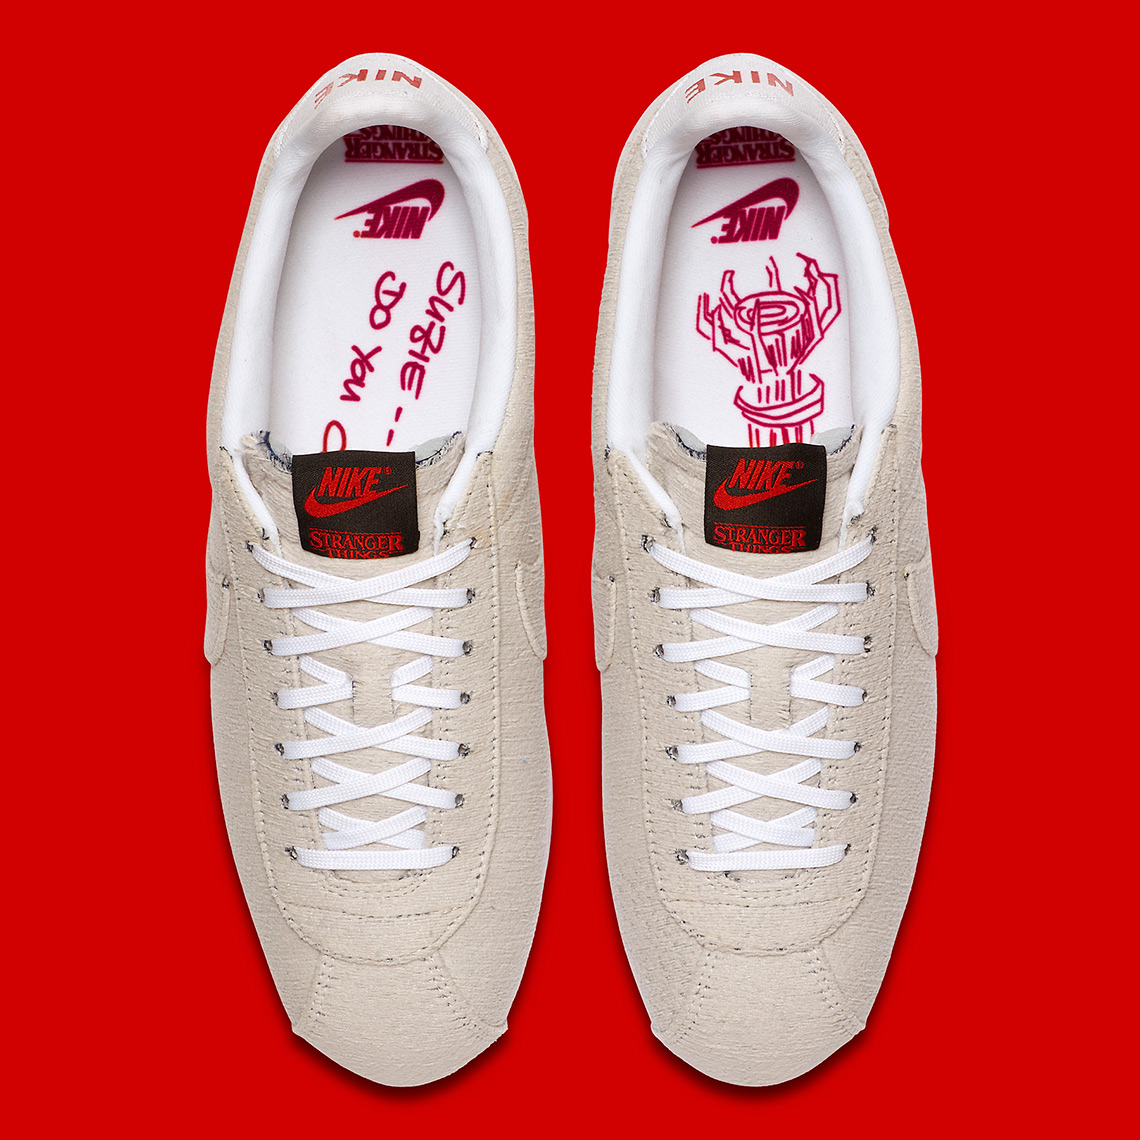 Stranger Things X Nike 'Upside Down' Trainers Contain A Secret Message -  Capital